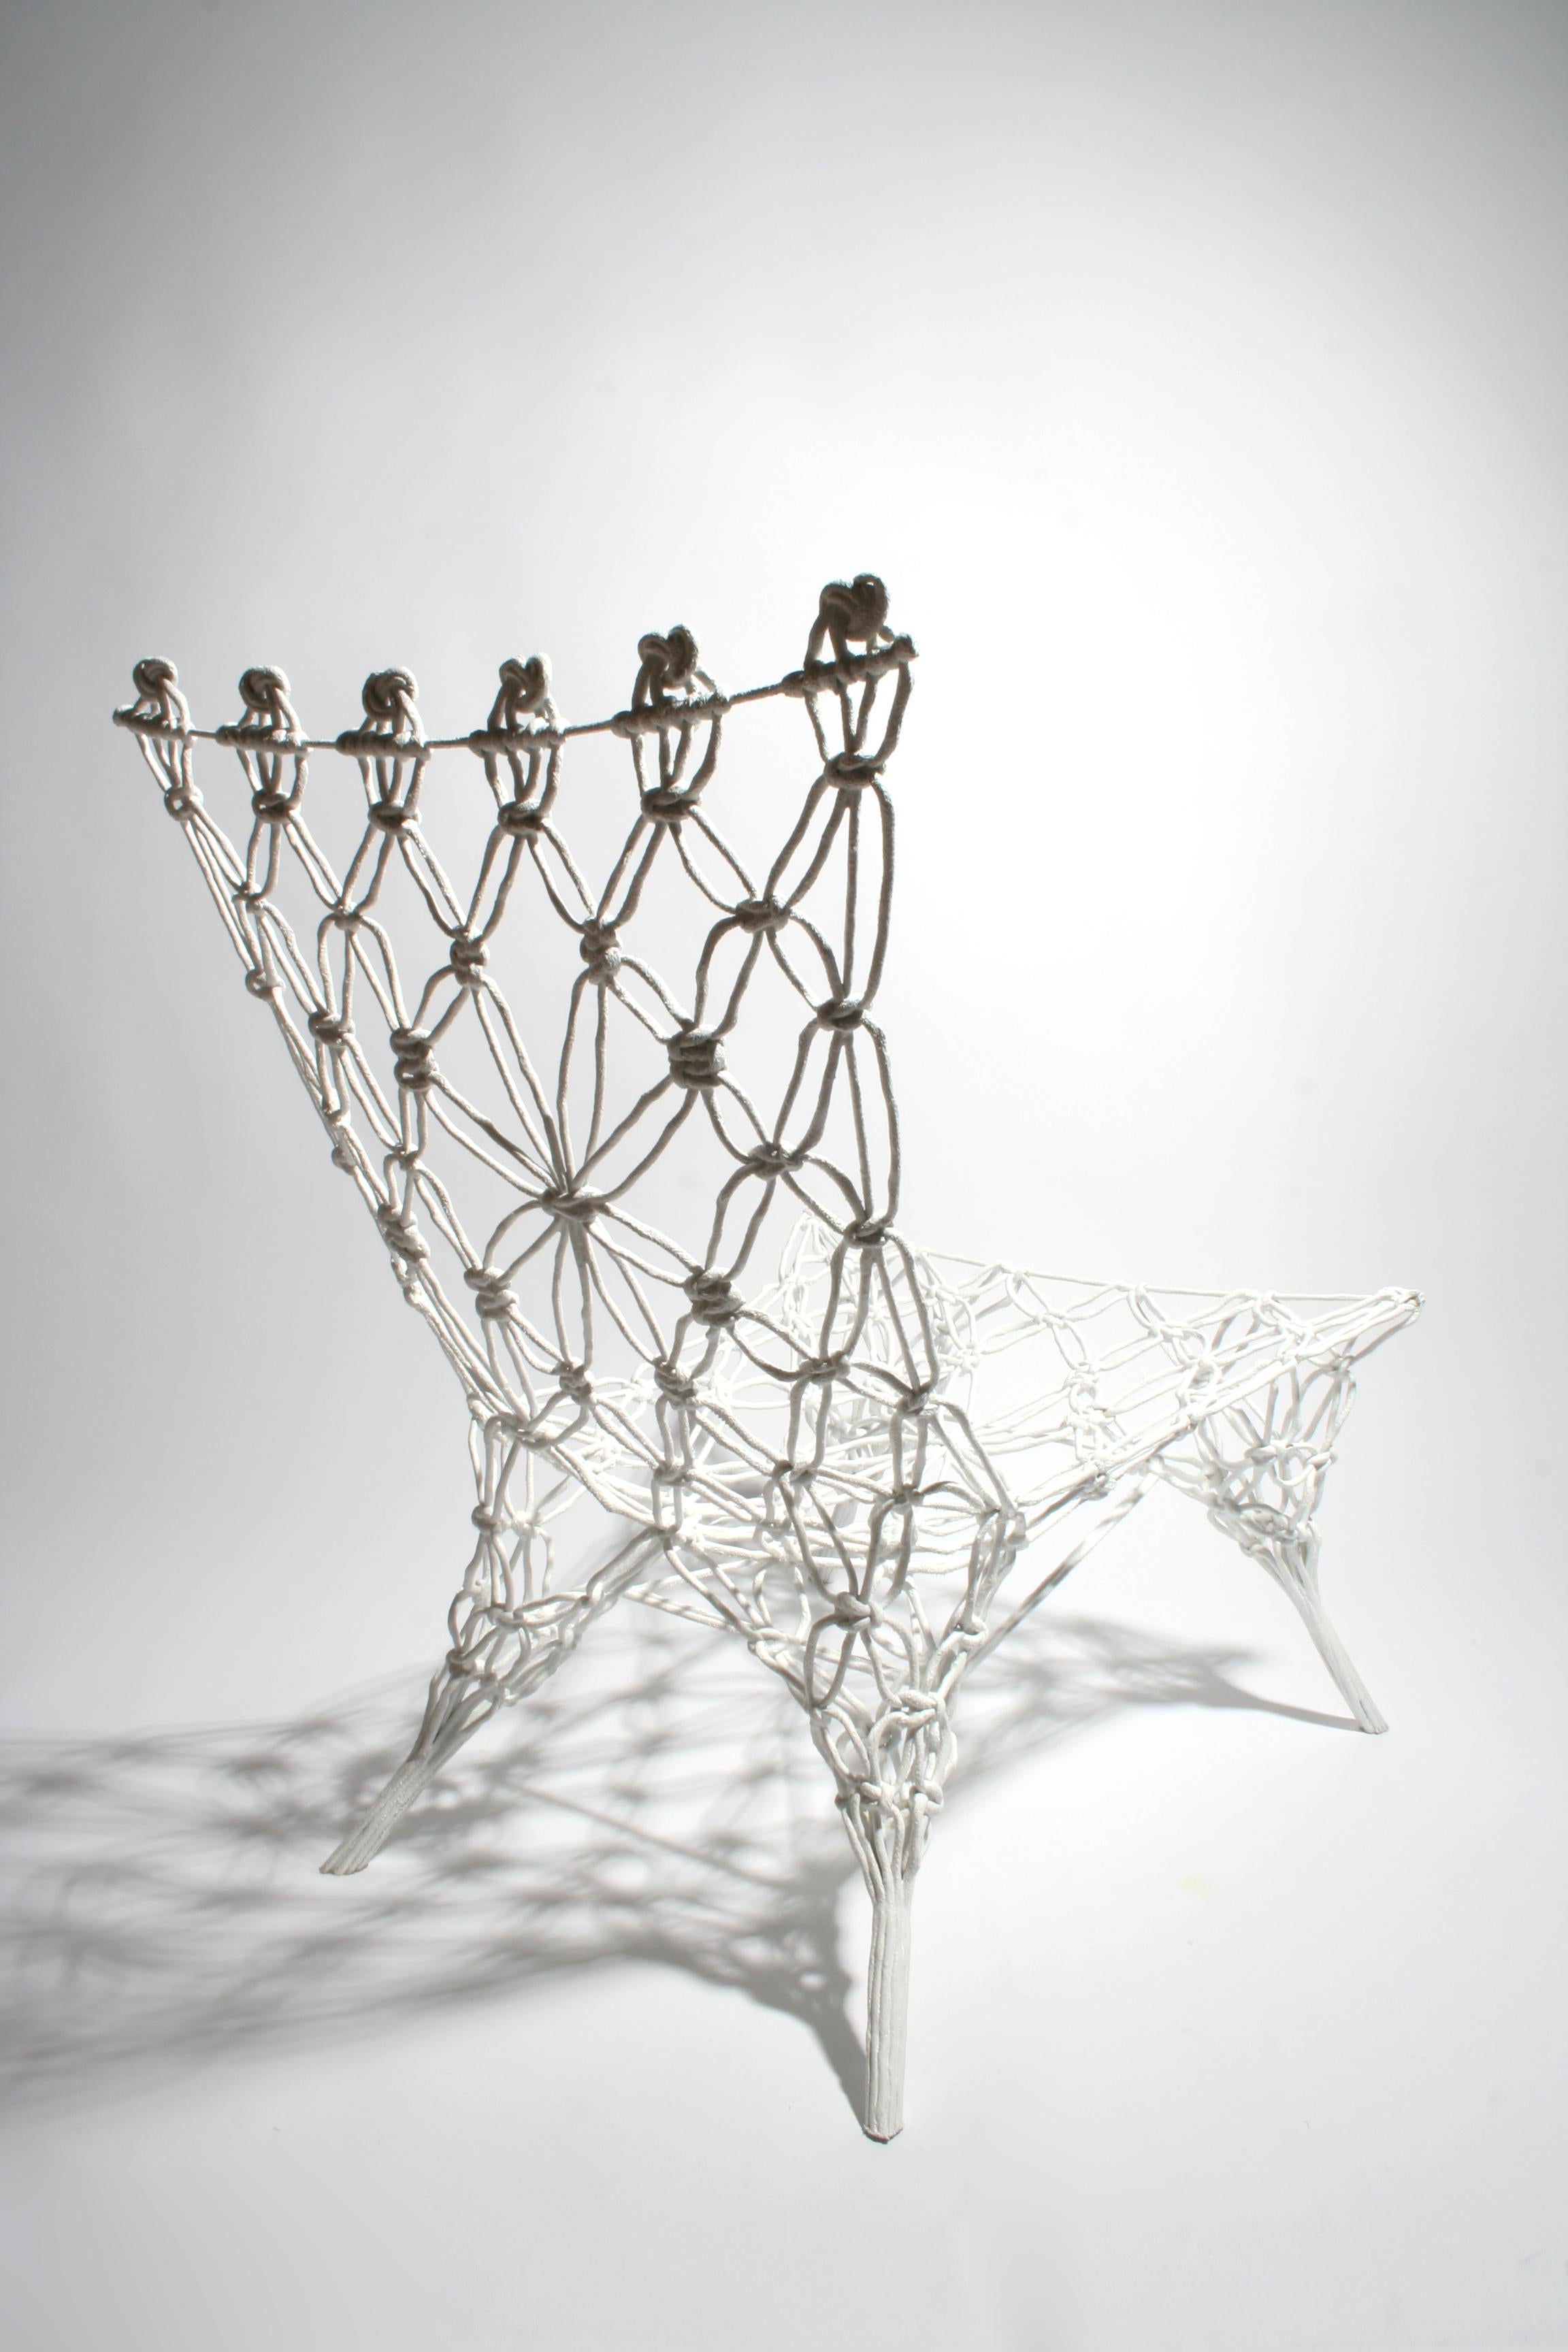 Dutch Knotted Chair, White, by Marcel Wanders, Hand-Knotted Chair, 2007, Unique For Sale